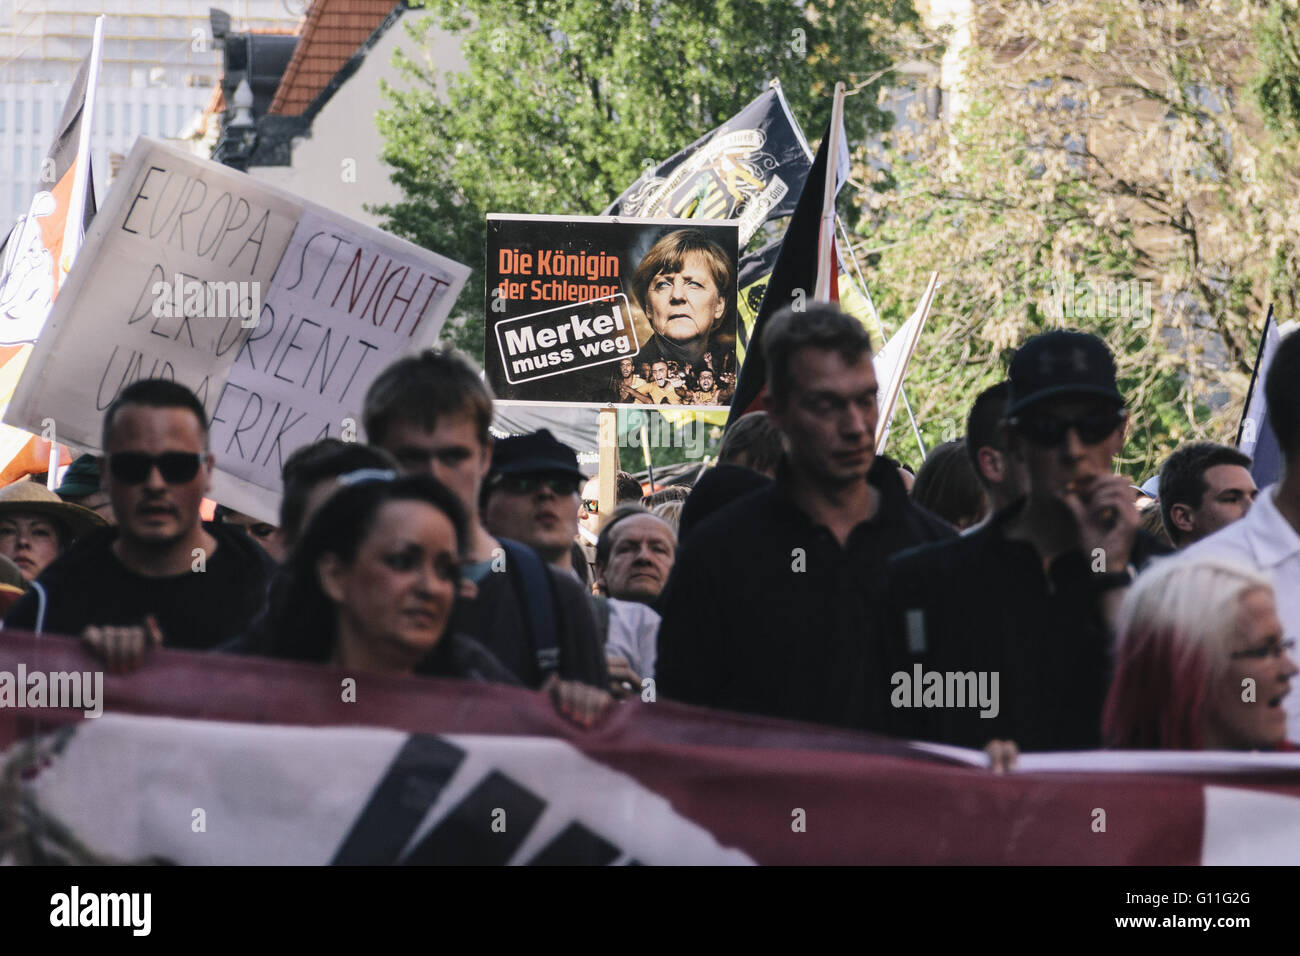 Berlin, Berlin, Germany. 7th May, 2016. 'The queen of people-traffickers. Merkel must go!' A banner during the rally held under the motto 'Merkel muss weg![Merkel must go]' organised by far-right group 'We for Berlin & We for Germany' Credit:  Jan Scheunert/ZUMA Wire/Alamy Live News Stock Photo